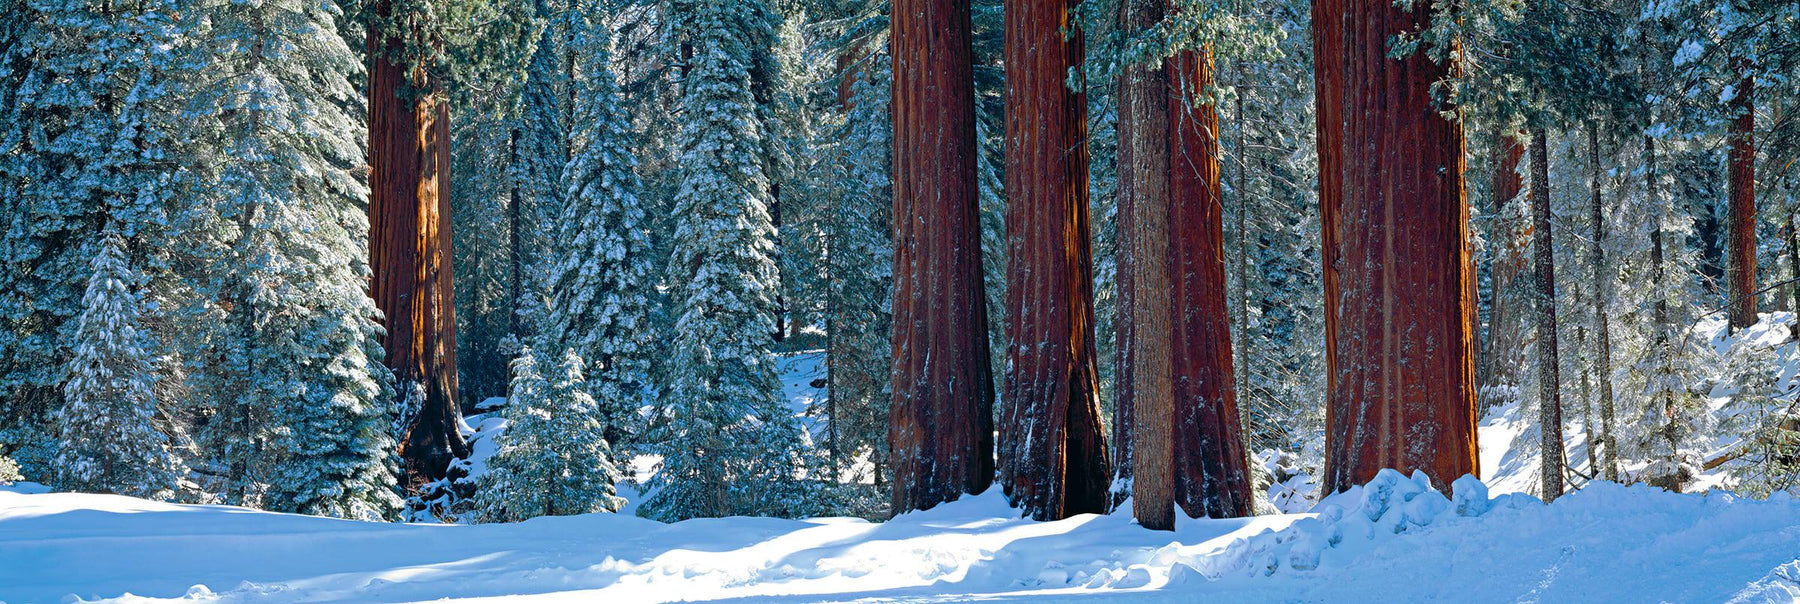 Bases of the snow covered Giant Sequoia trees in the Sequoia National Forest California 